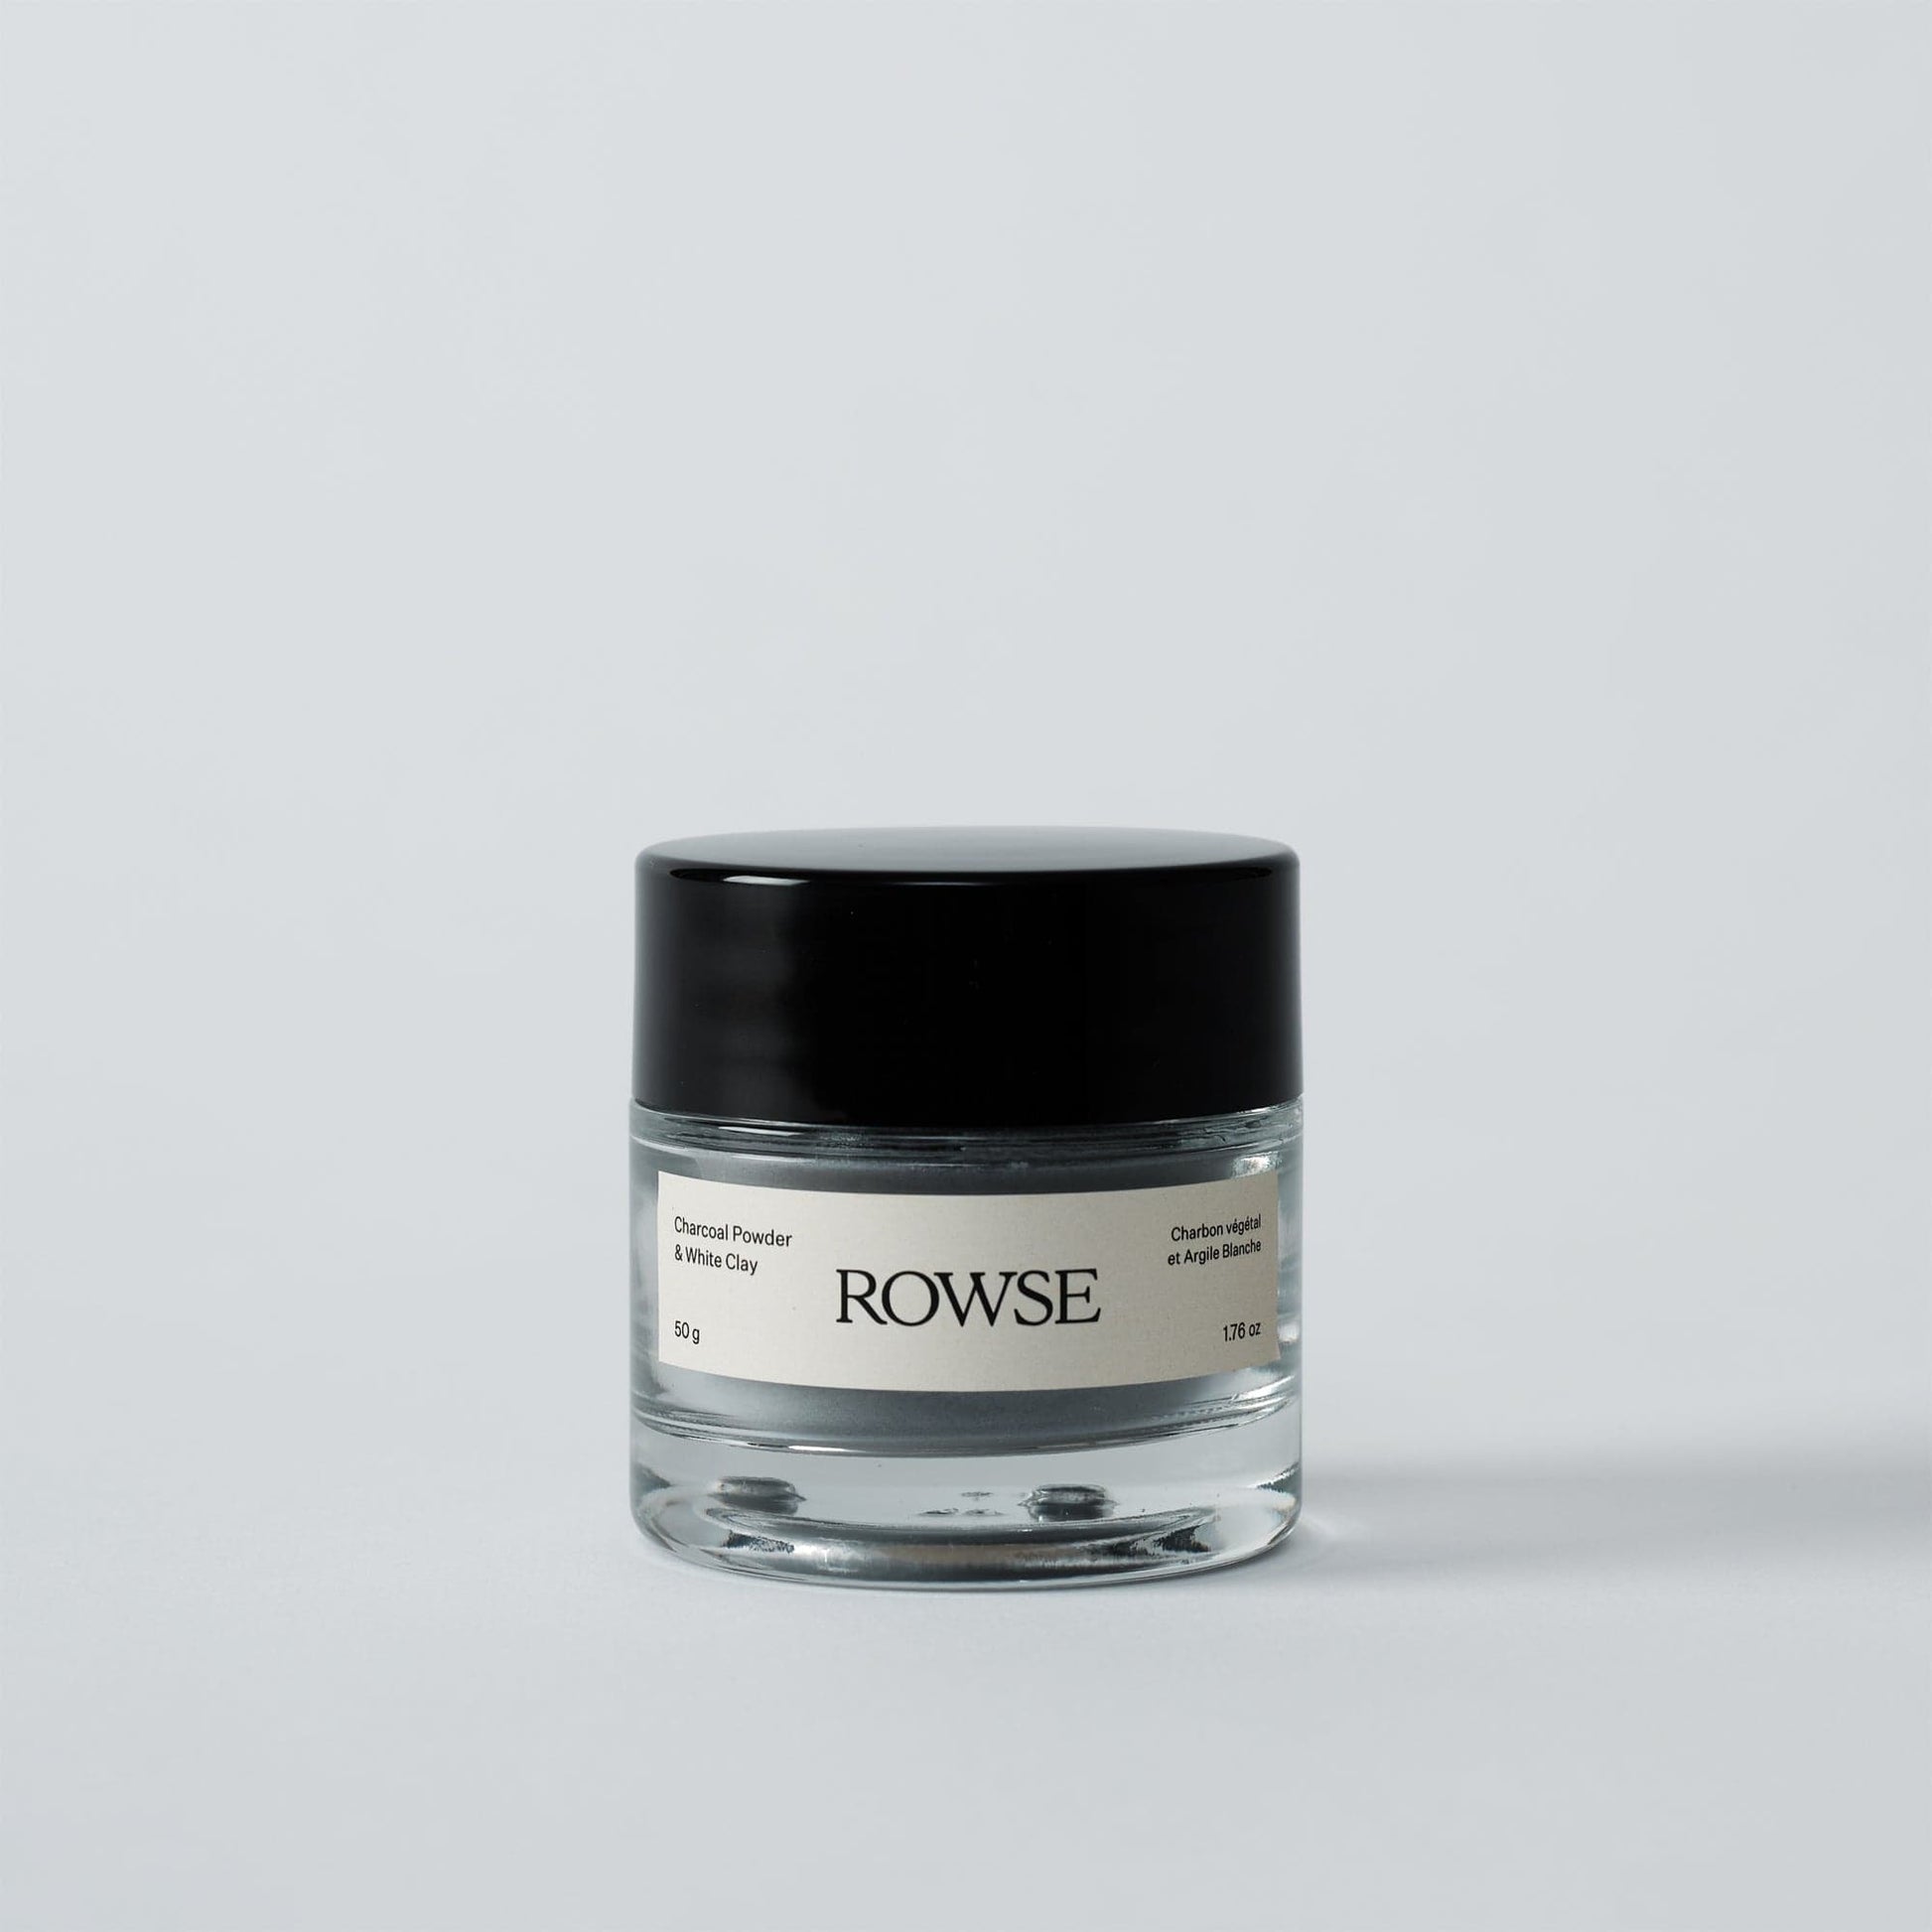 ROWSE-development Clays & Powders Activated Charcoal Powder & White Clay1